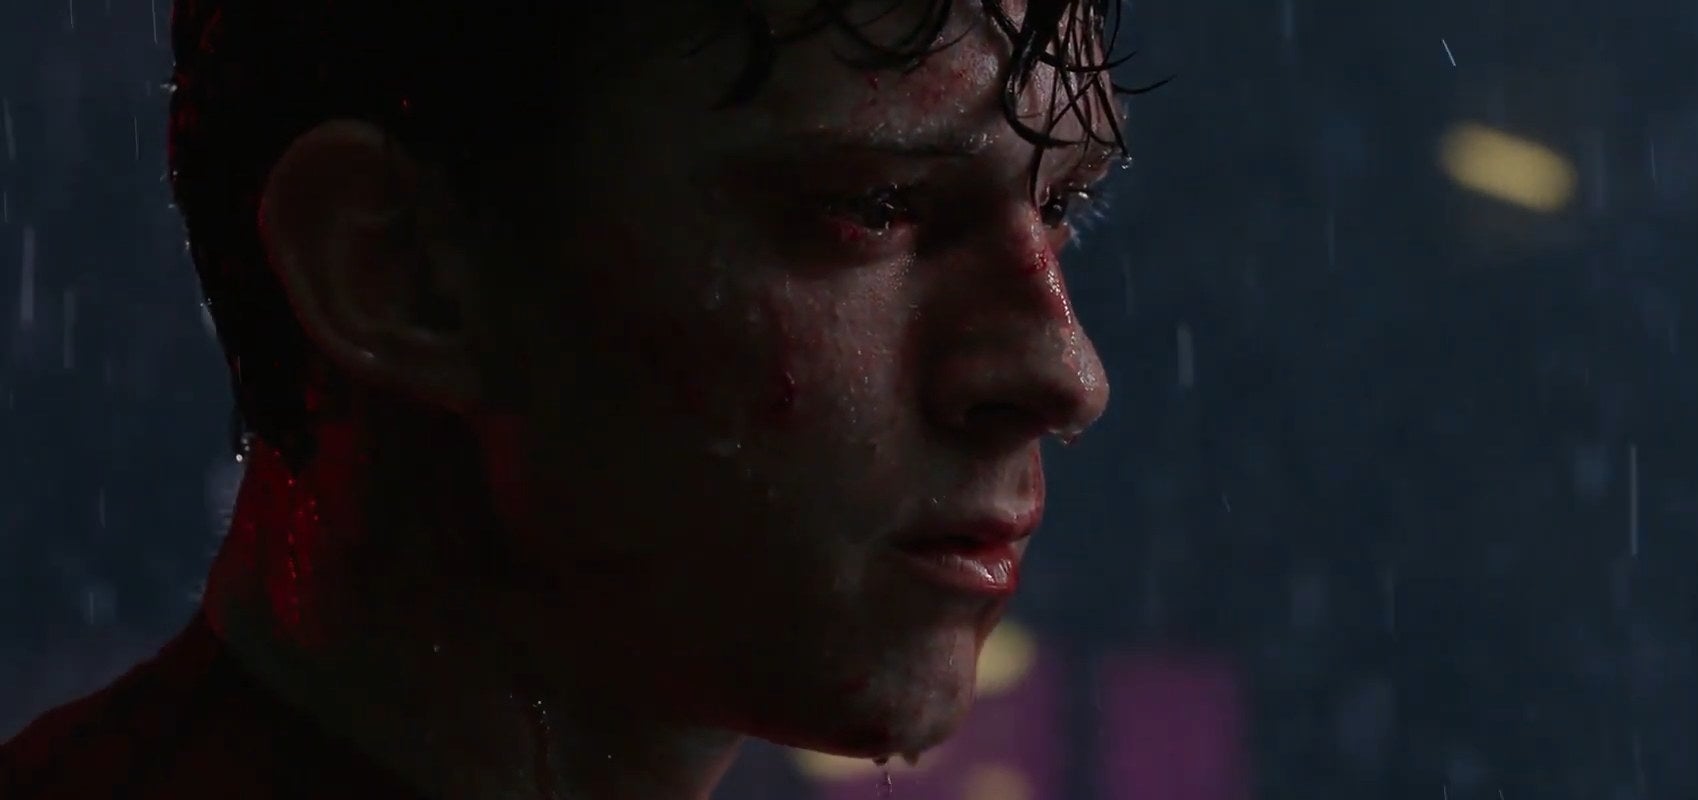 Peter standing in the rain in &quot;Spider-Man: No Way Home&quot;